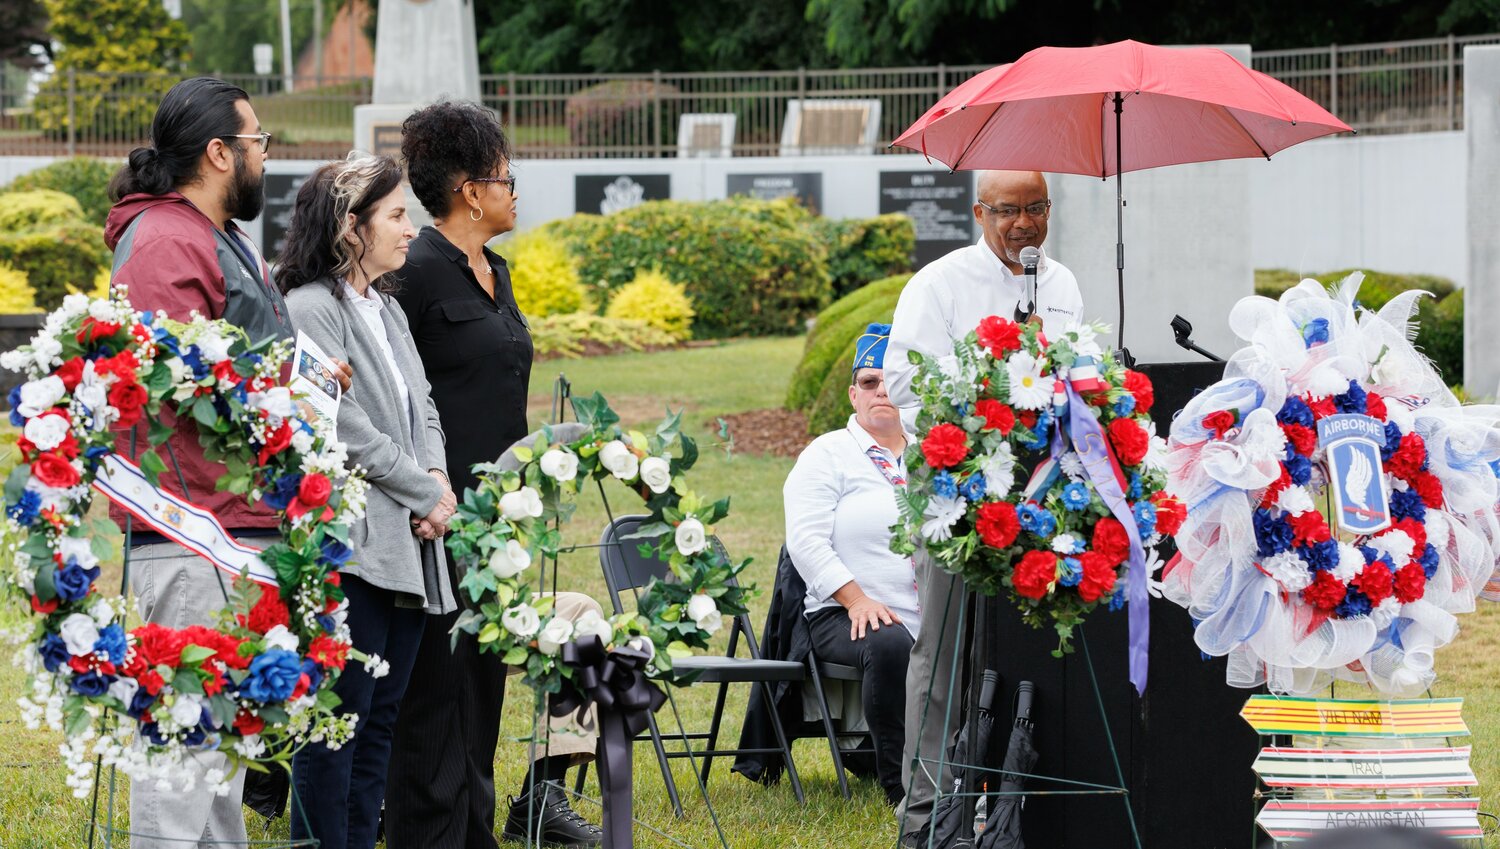 Fayetteville City Council members deliver a city proclamation during the Memorial Day ceremony at Freedom Memorial Park. From left are Mario Benavente, Kathy Jensen, Brenda McNair and Derrick Thompson.